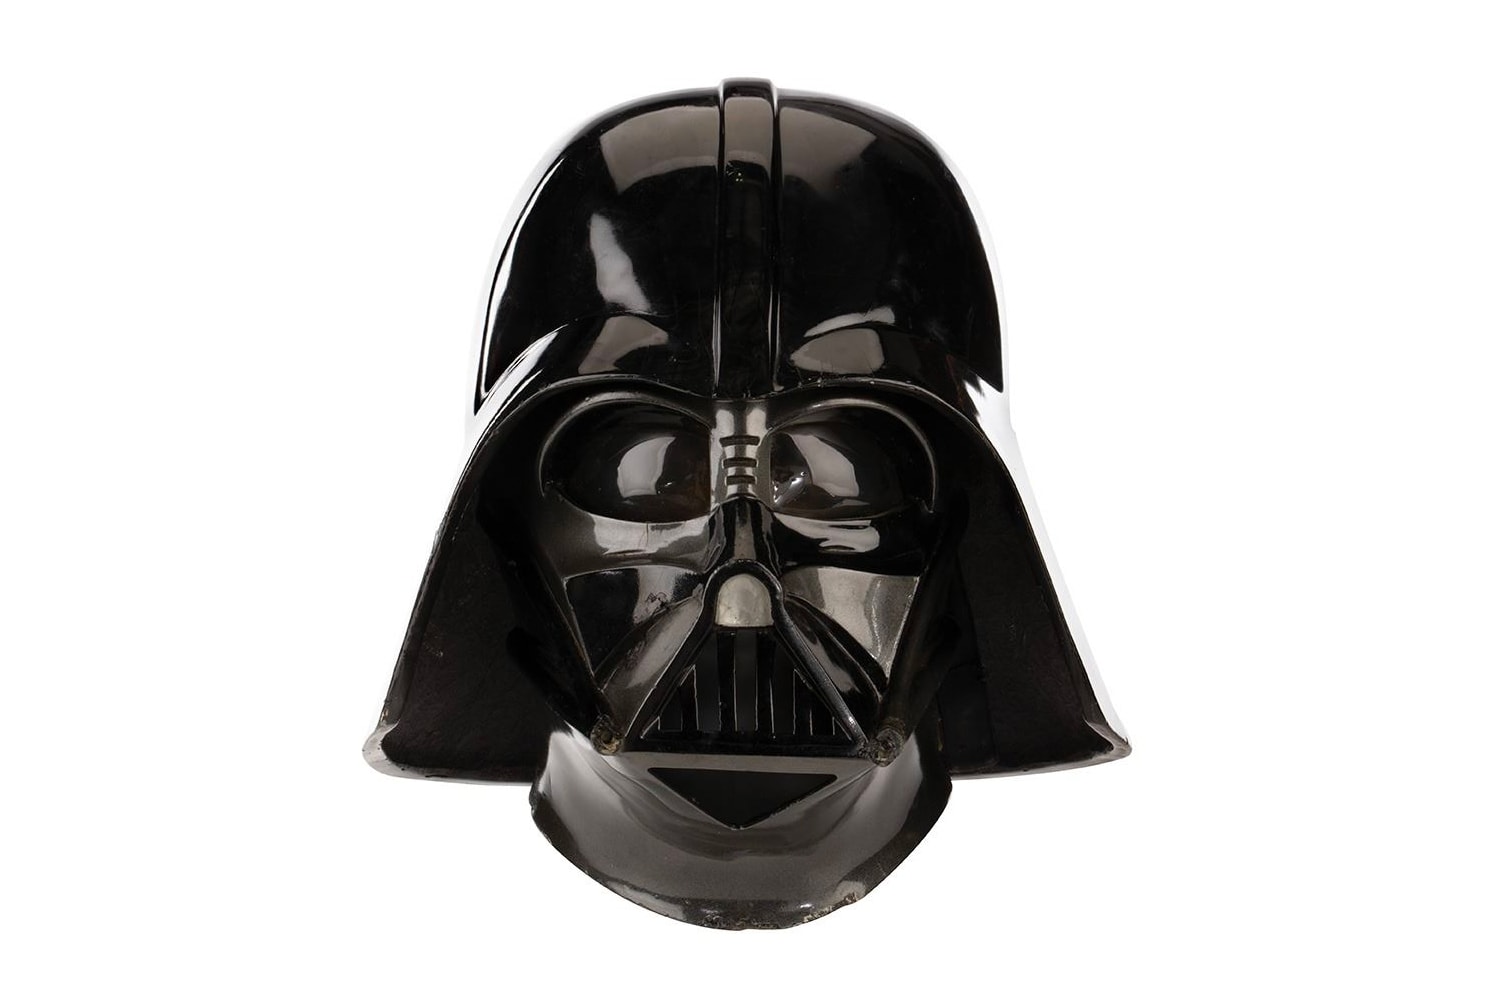 'Star Wars: The Empire Strikes Back' Darth Vader Helmet Auction David Prowse 1980 used in film real science fiction fantasy Lucasfilm George Lucas luke skywalker collectible memorabilia 